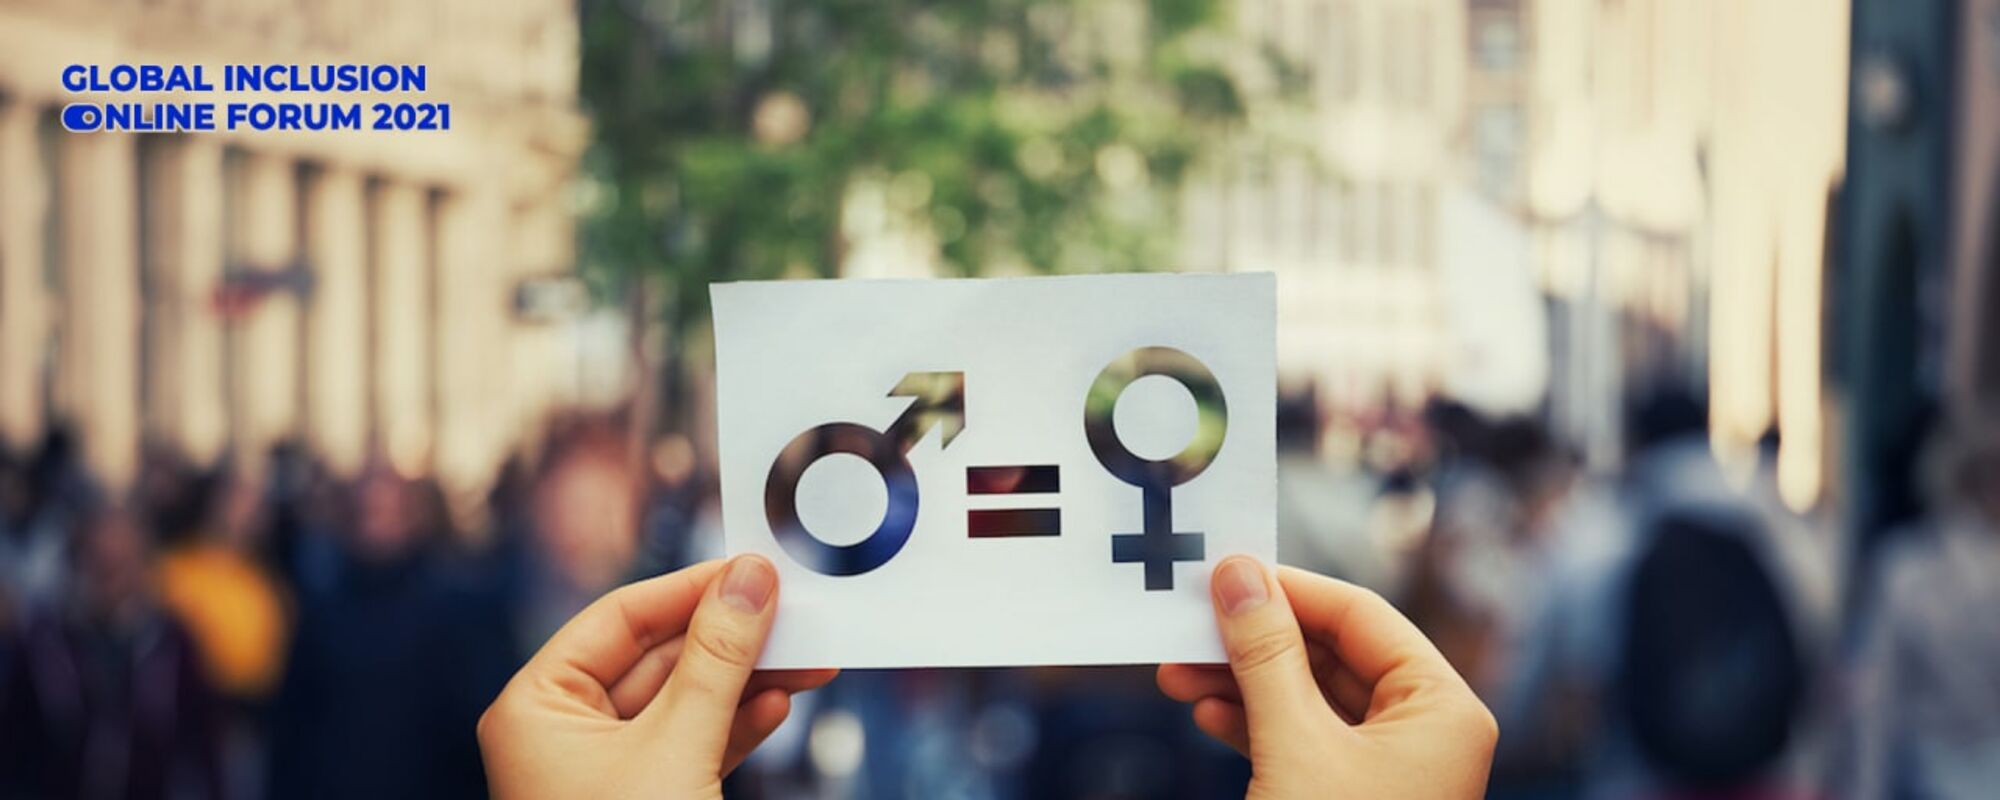 MARIIA PRYLYPKO — FIRST STEPS ON THE GENDER EQUALITY ROAD 